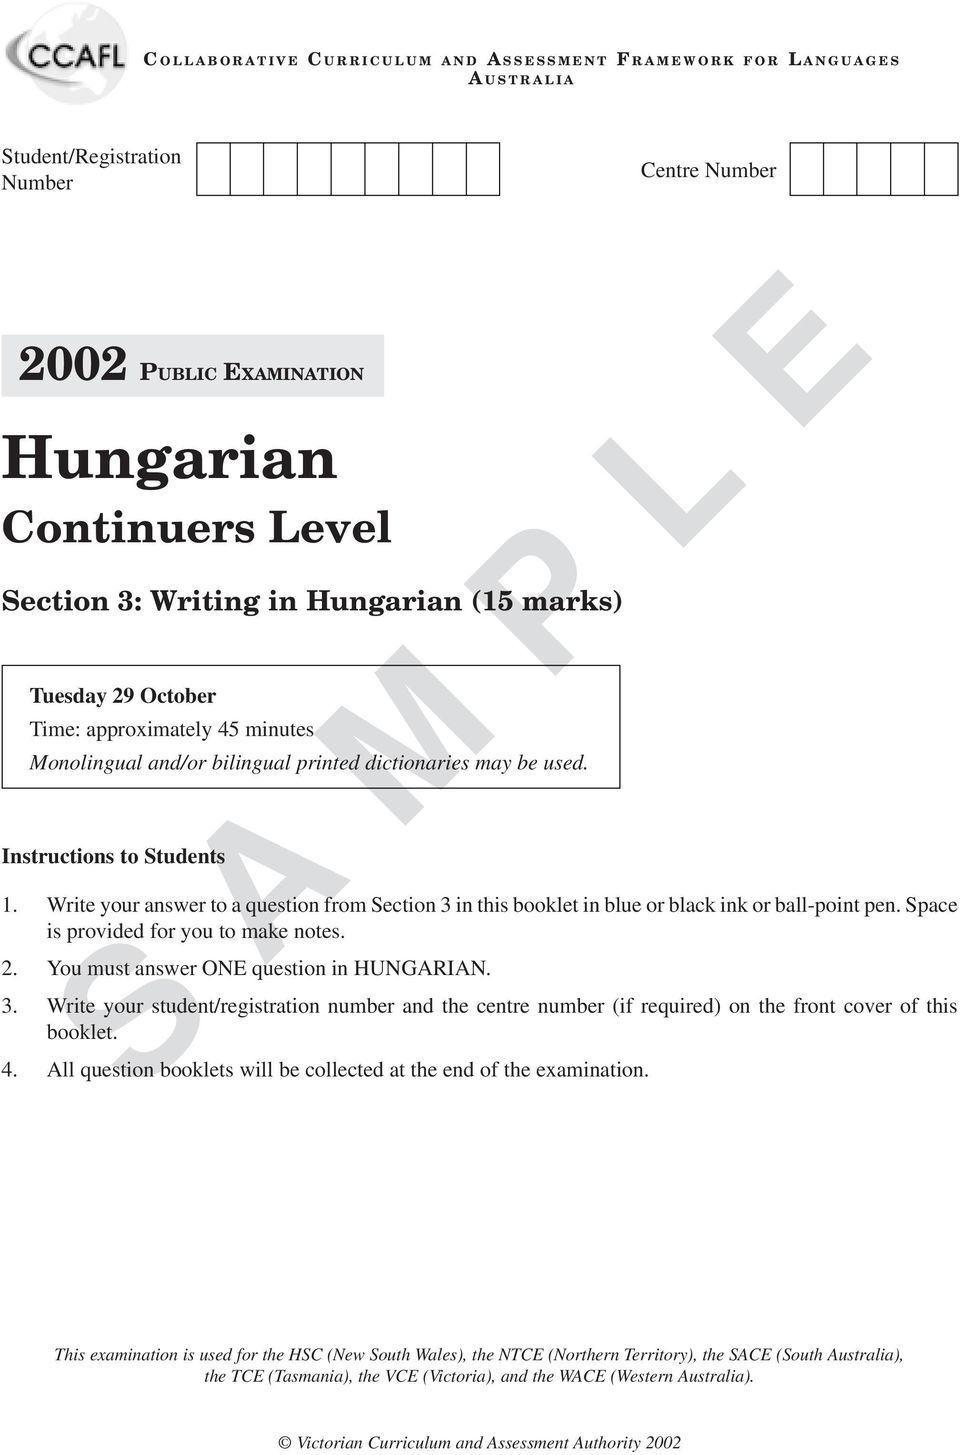 Write your answer to a question from Section 3 in this booklet in blue or black ink or ball-point pen. Space is provided for you to make notes. 2. You must answer ONE question in HUNGARIAN. 3. Write your student/registration number and the centre number (if required) on the front cover of this booklet.